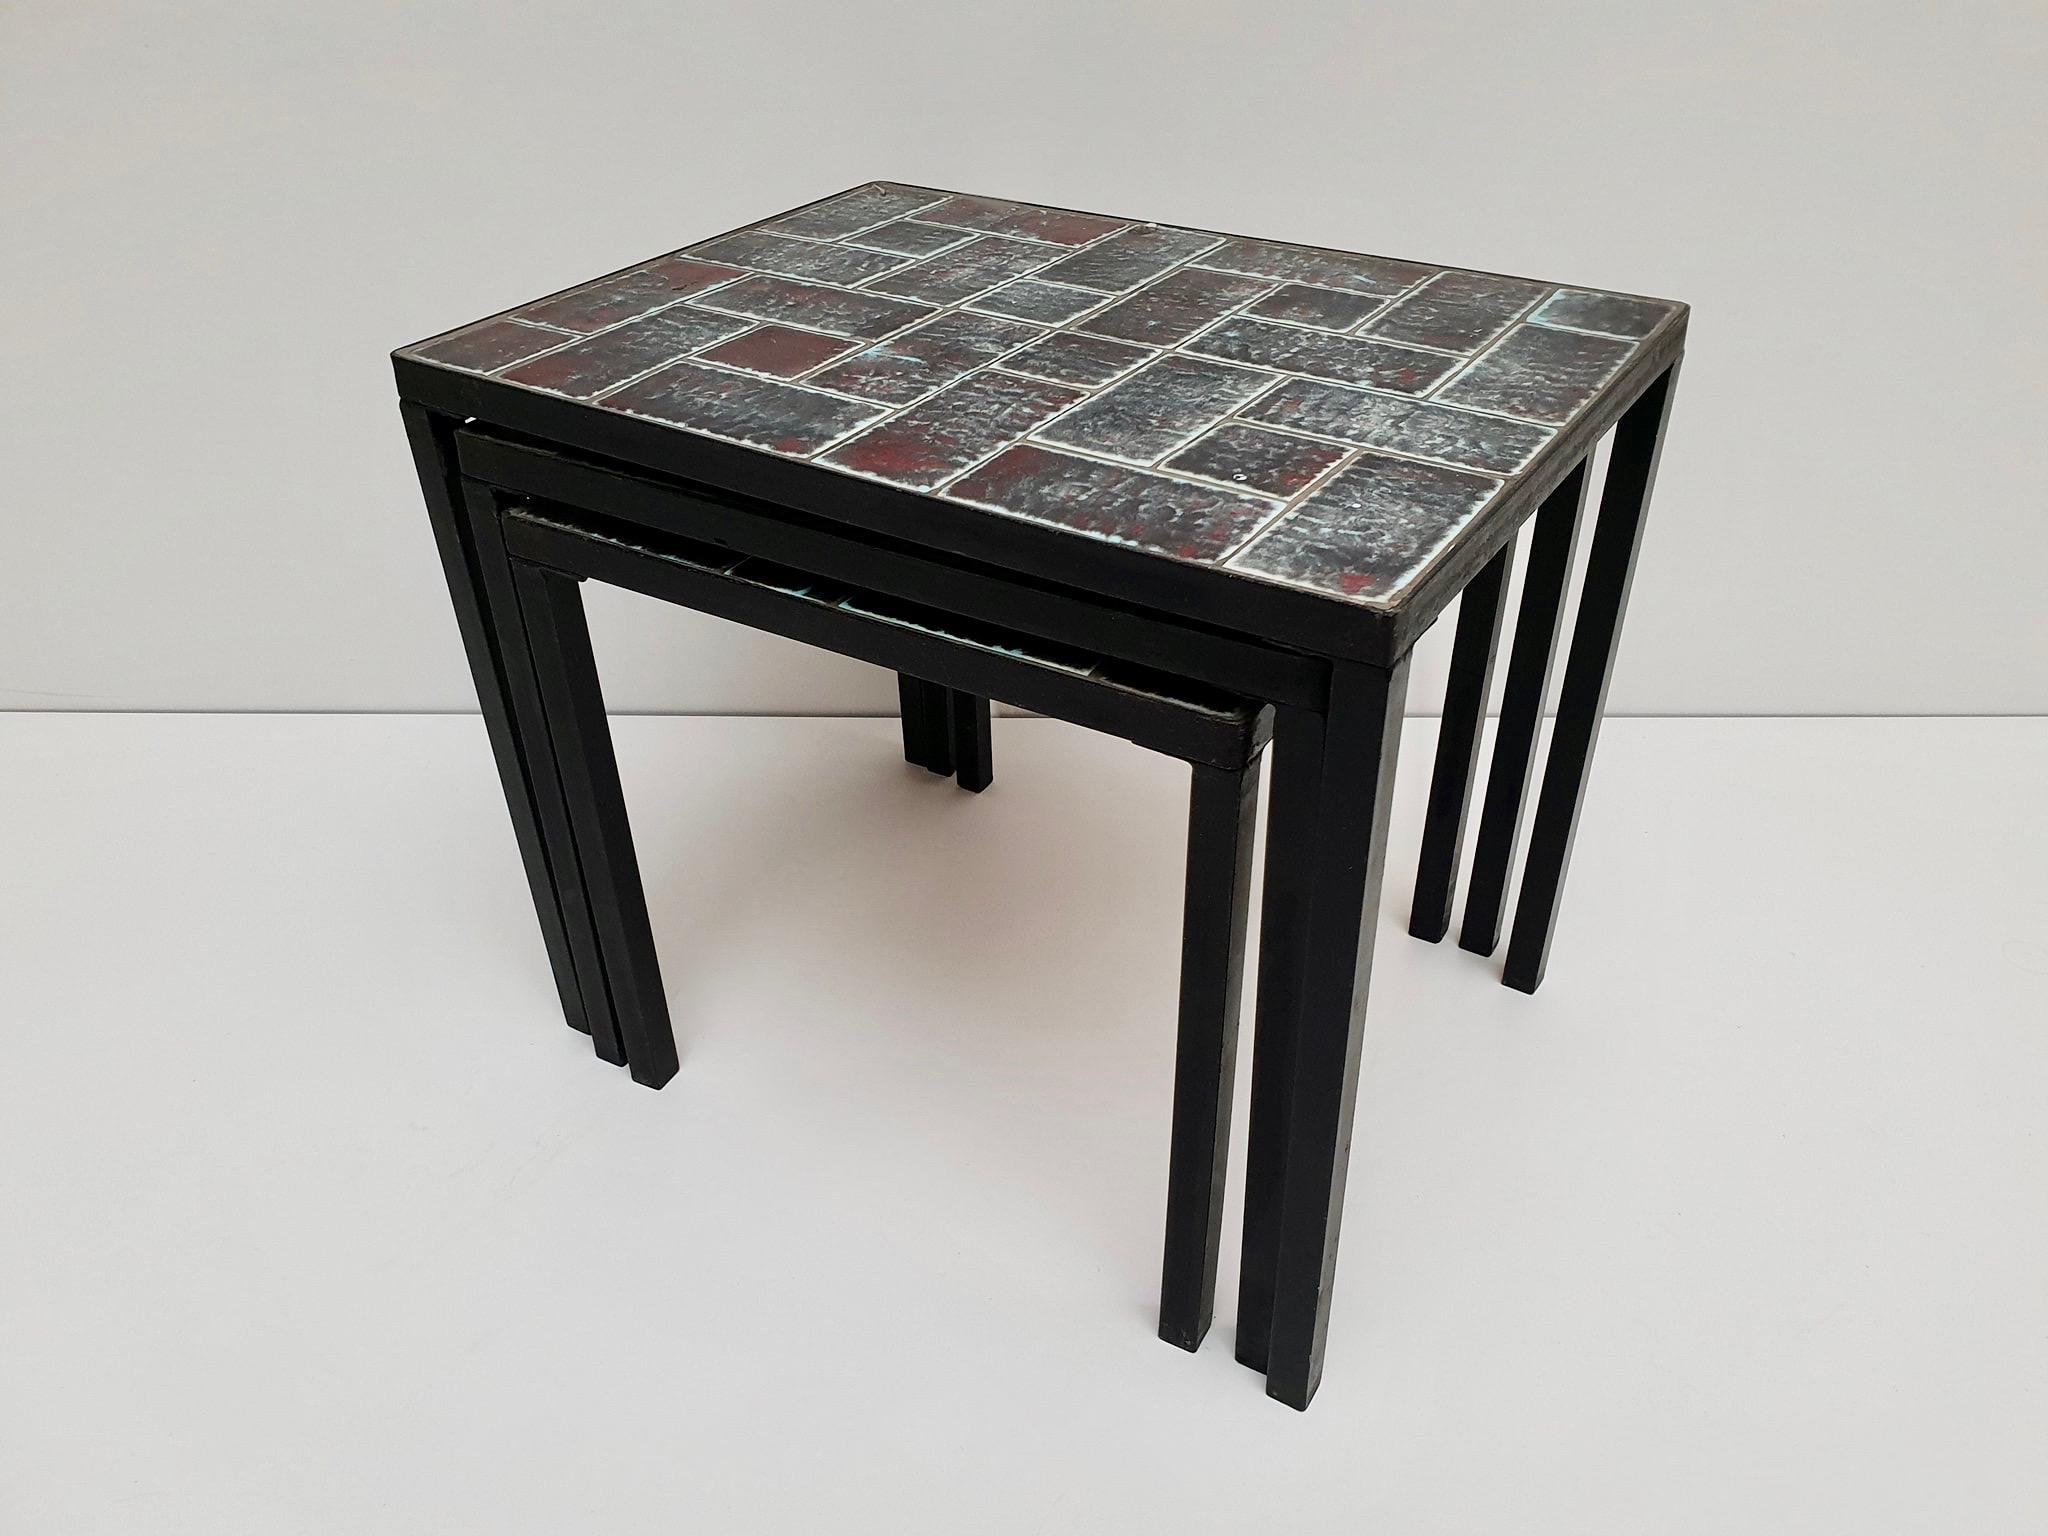 Three Mid-Century Black Wrought Iron Ceramic Tile Stacking Tables circa 1960 In Good Condition For Sale In Antwerp, BE